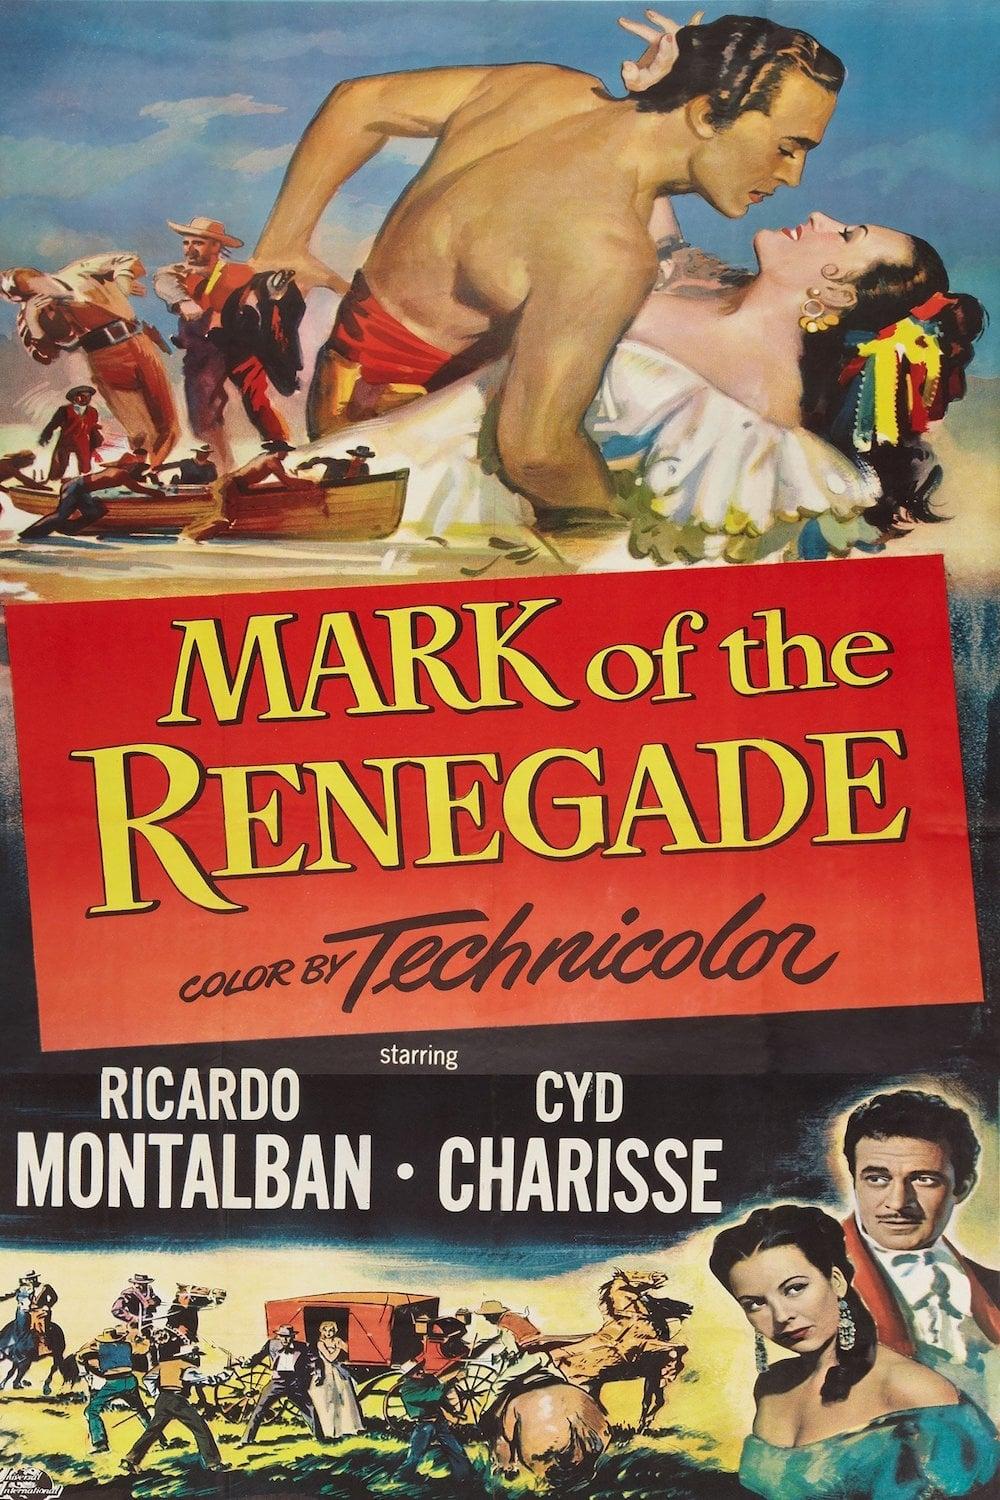 The Mark of the Renegade poster